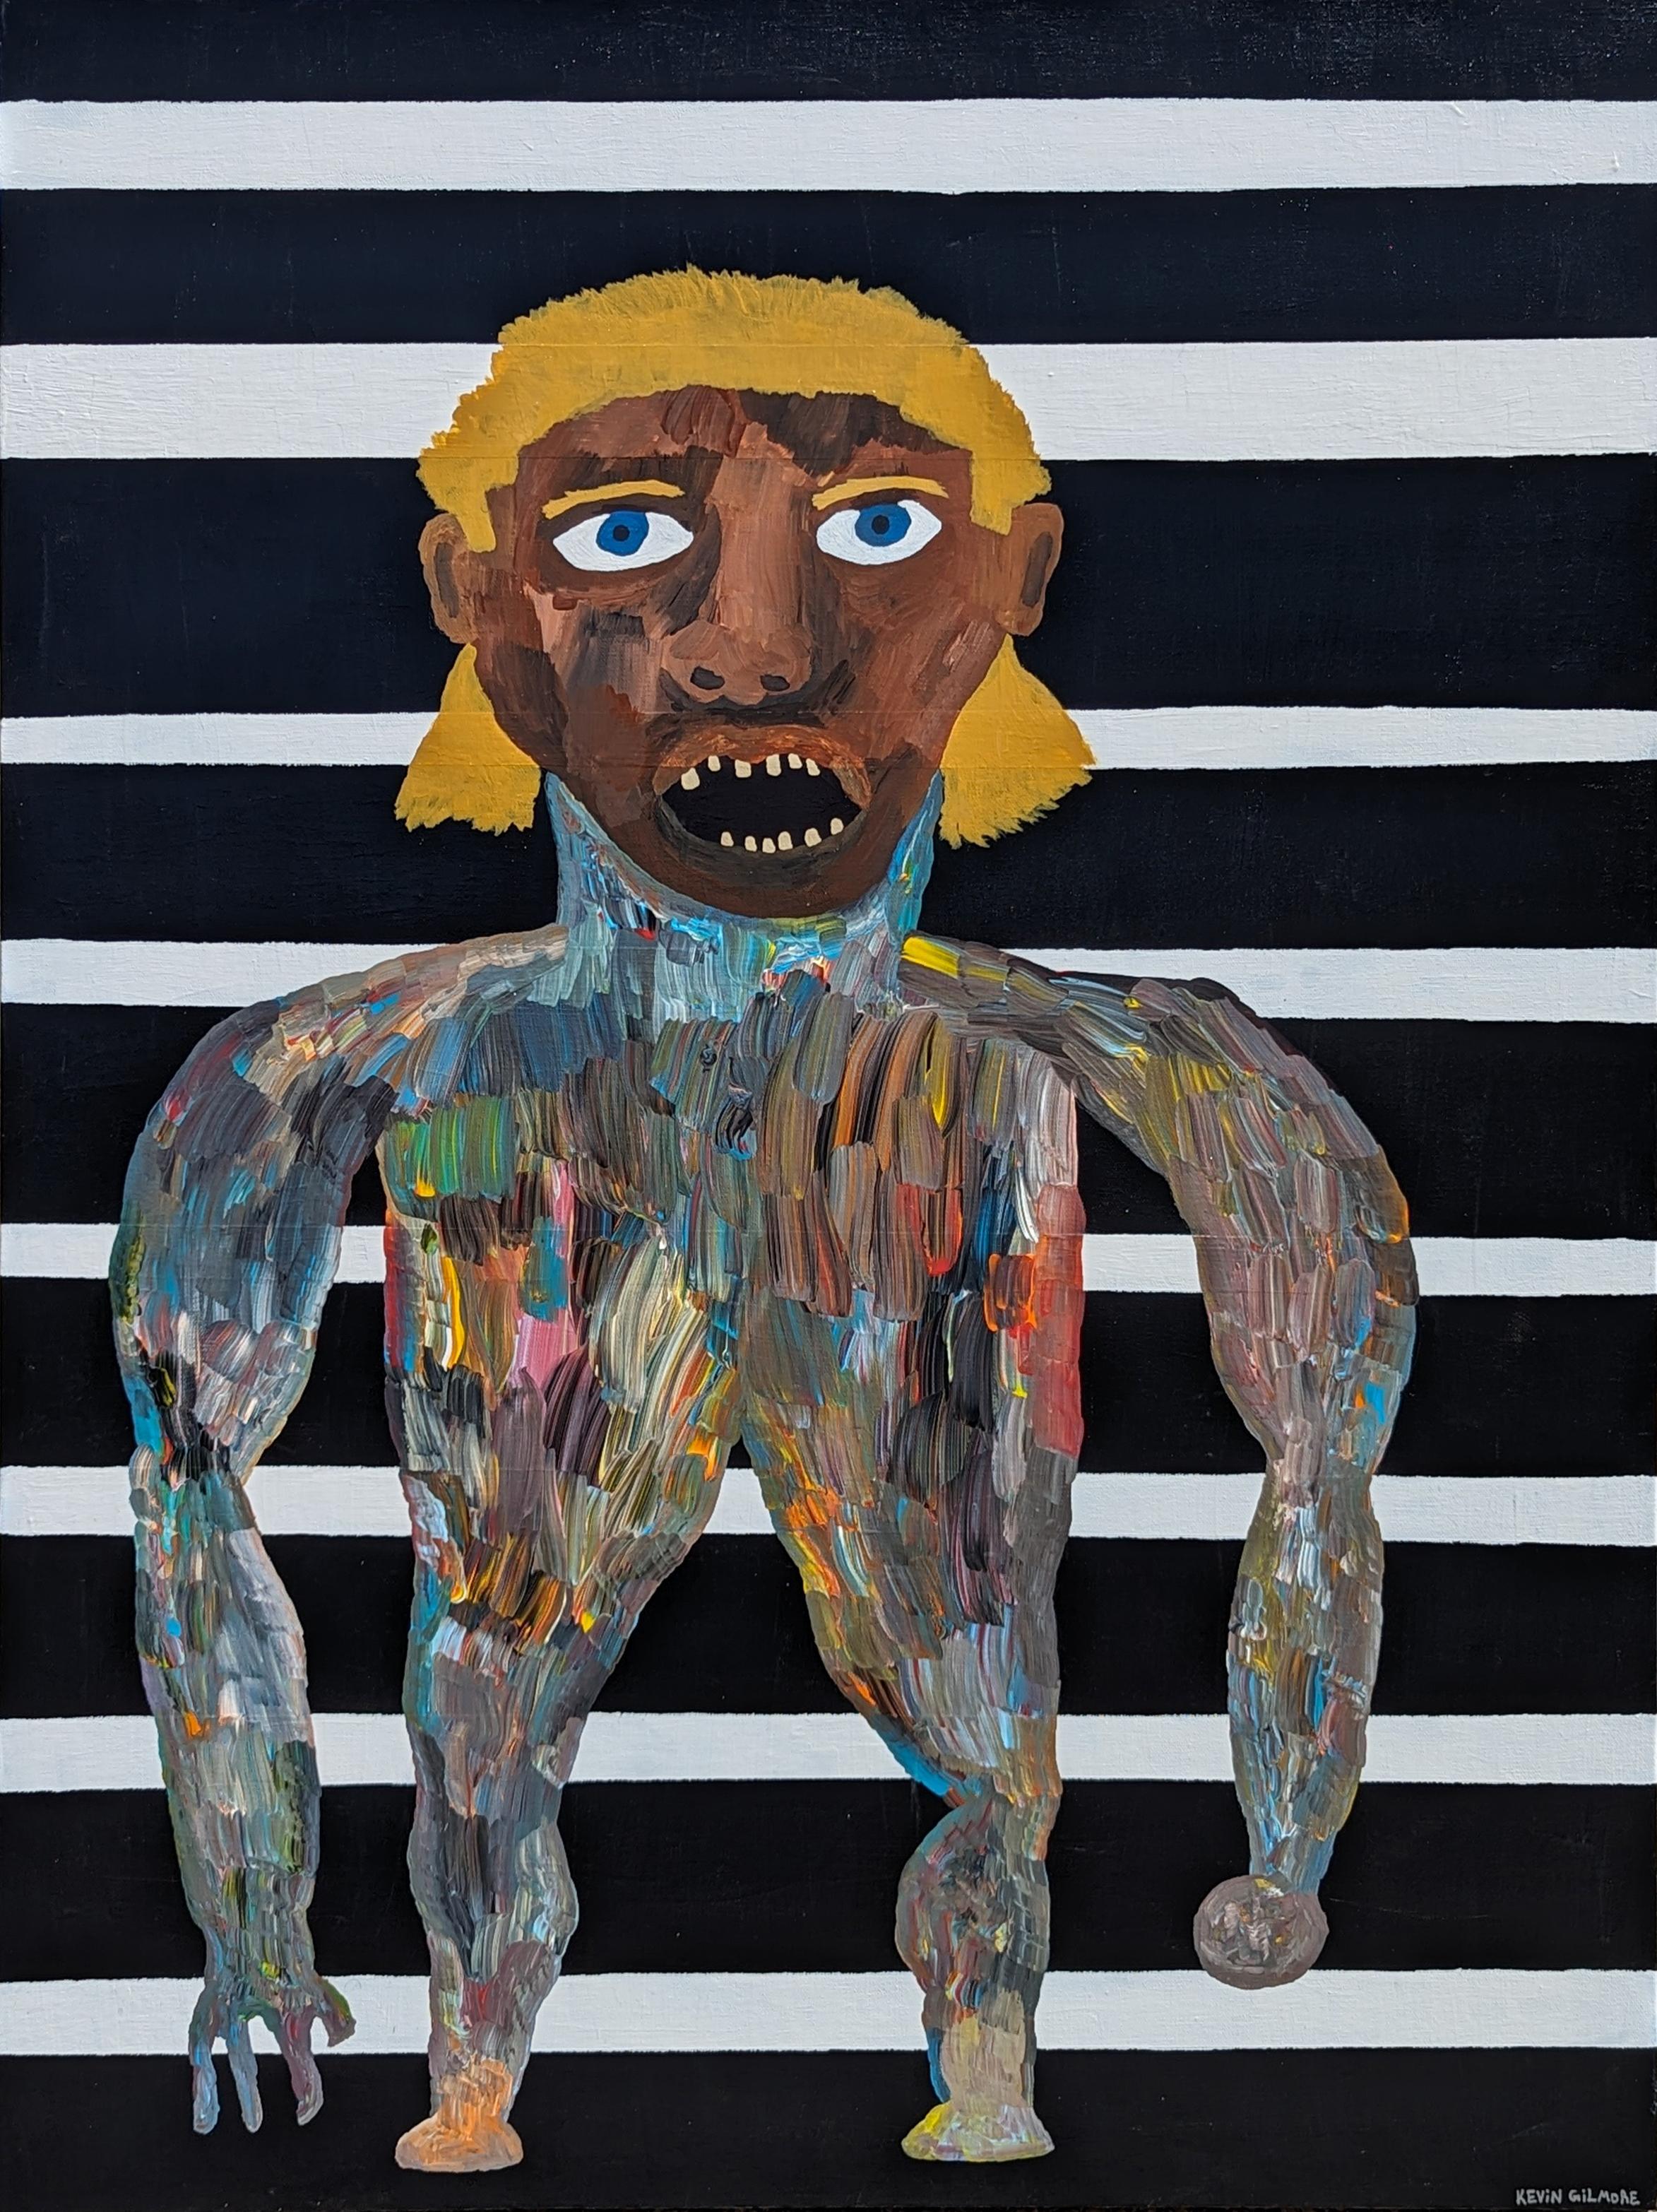 Kevin Gilmore Figurative Painting - "Mullet Man" Contemporary Striped Outsider Art Figurative Portrait Painting